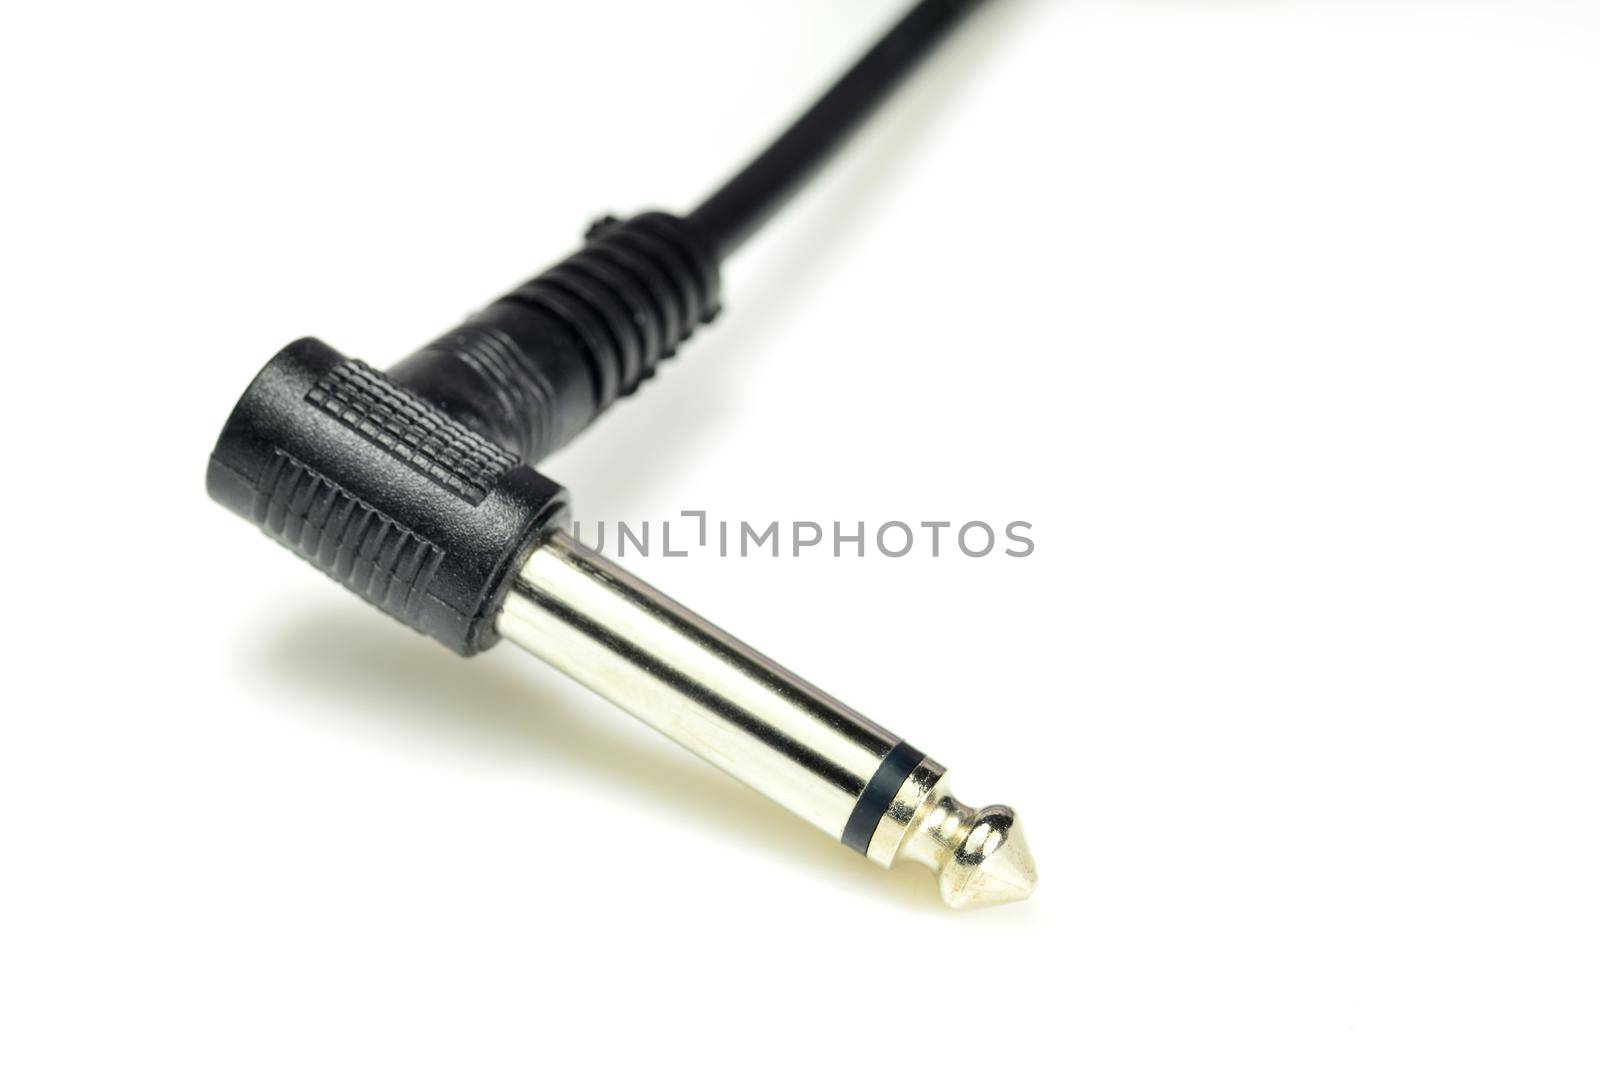 6.5mm phone connector in a closeup